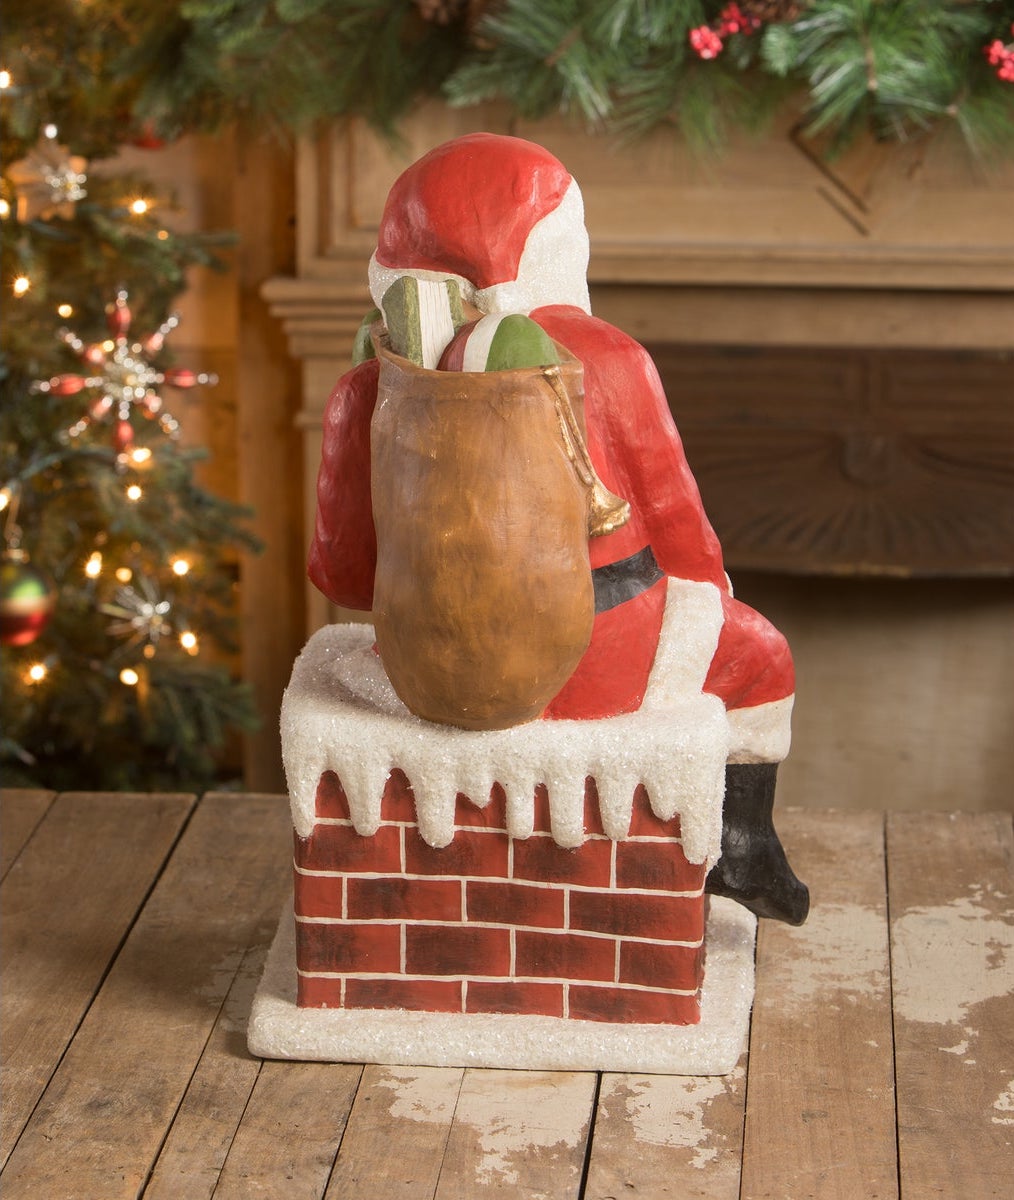 Large paper Mache Santa Going Down the Chimney by Bethany Lowe